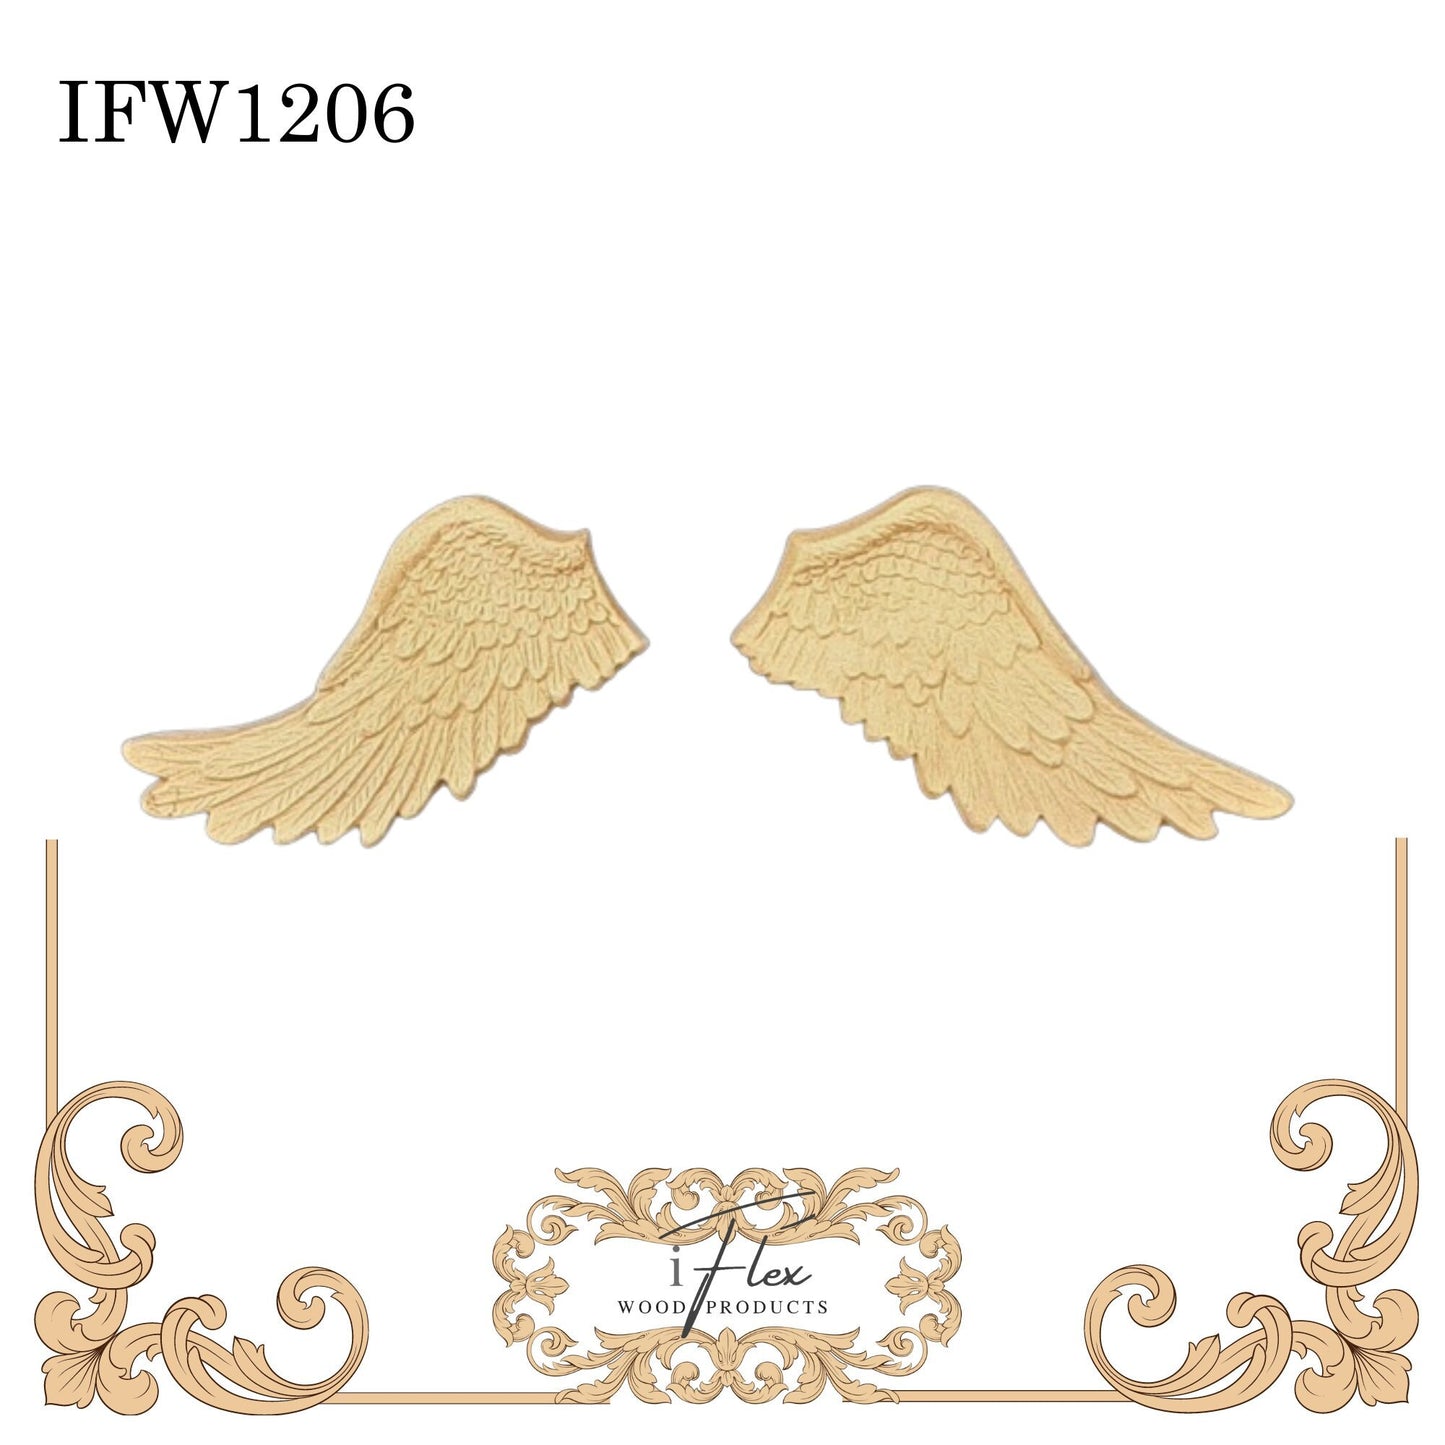 IFW 1206 iFlex Wood Products, bendable mouldings, flexible, wooden appliques, wings